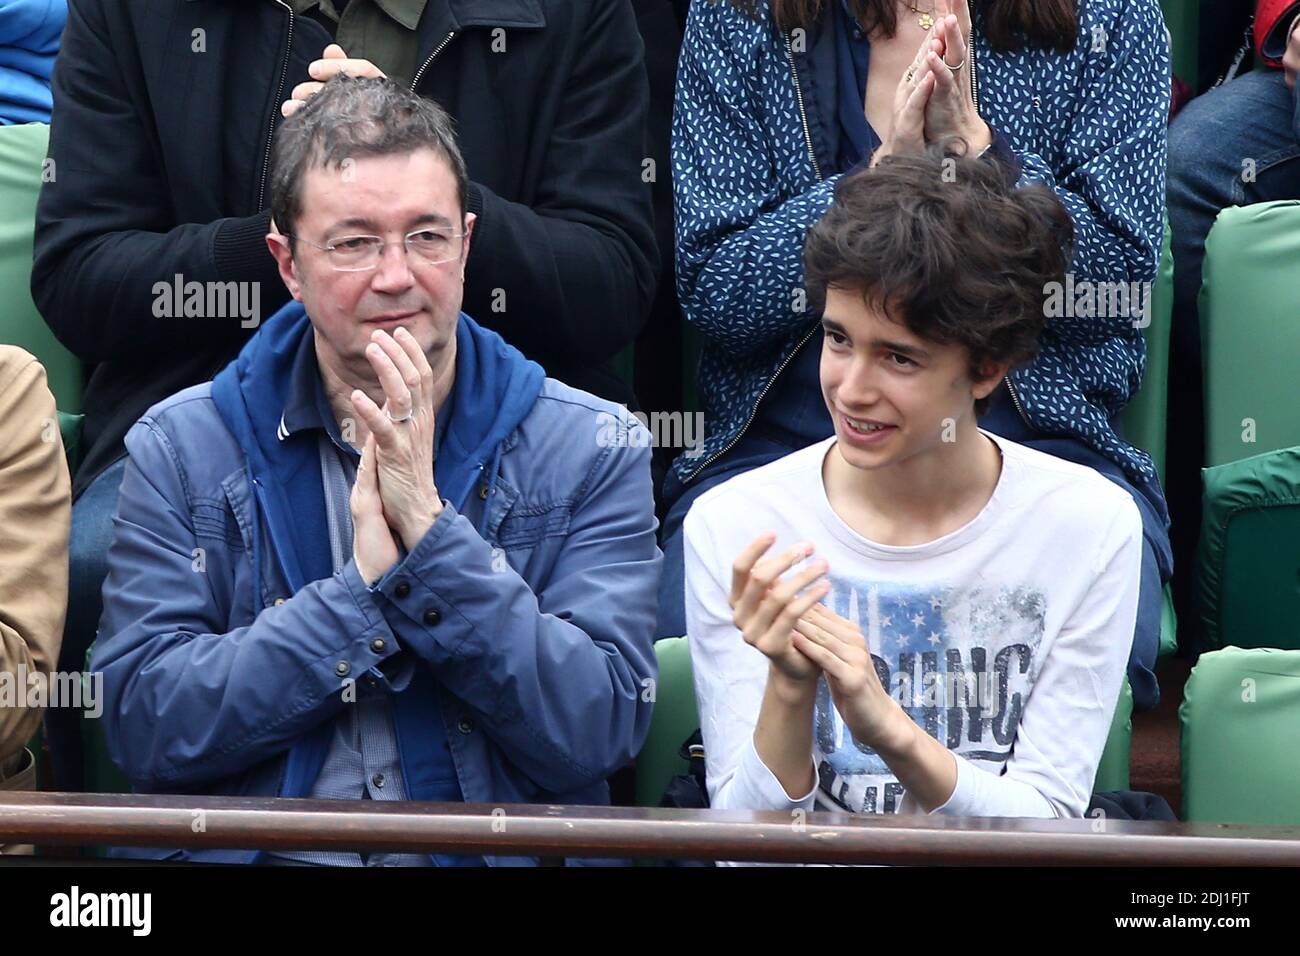 Frederic Bouraly in the VIP Tribune during French Tennis Open at Roland-Garros arena in Paris, France on May 29, 2016. Photo by ABACAPRESS.COM Stock Photo